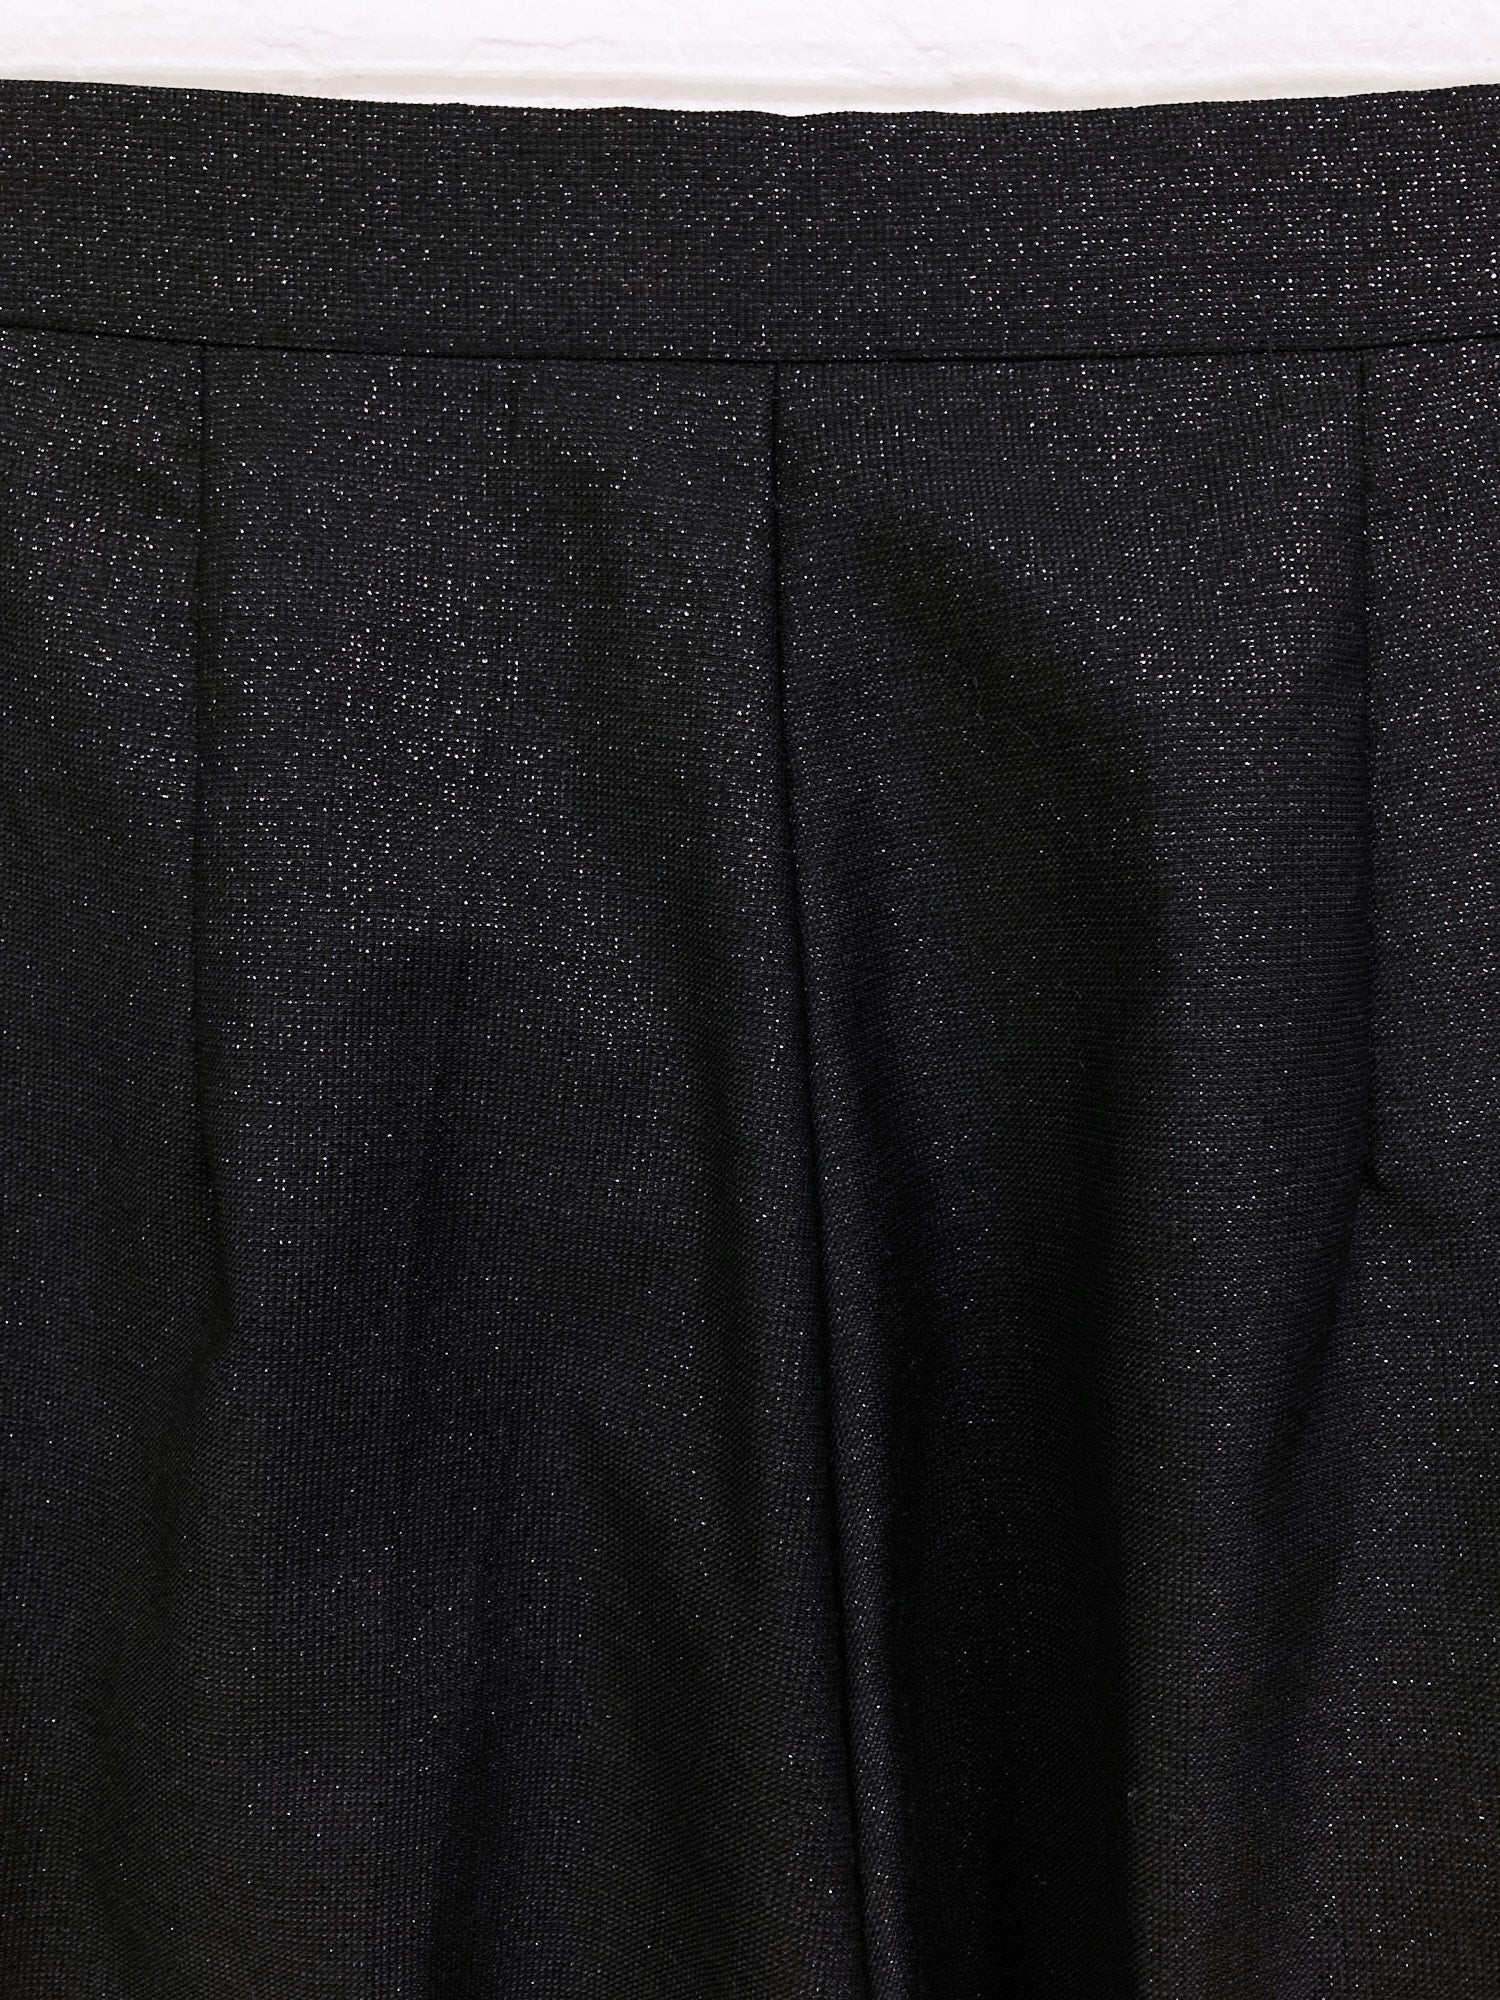 Jean Colonna sparkly black wool pleated center press trousers - M